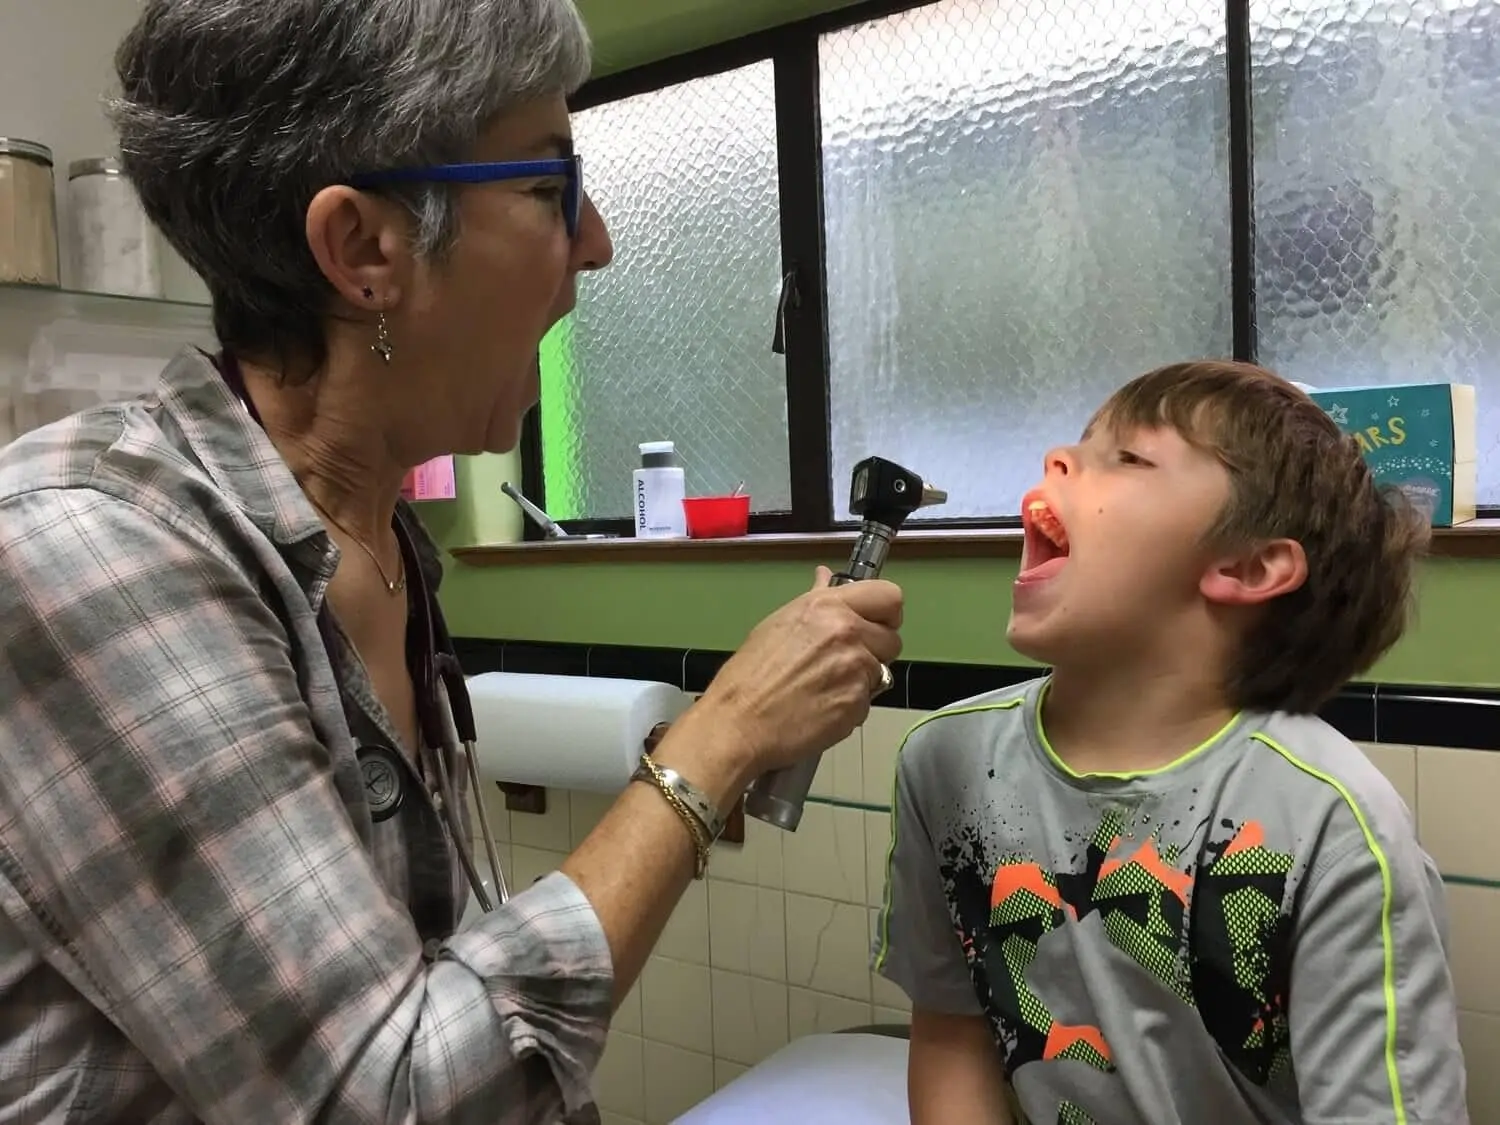 Dr. Robin checks the teeth of her patient